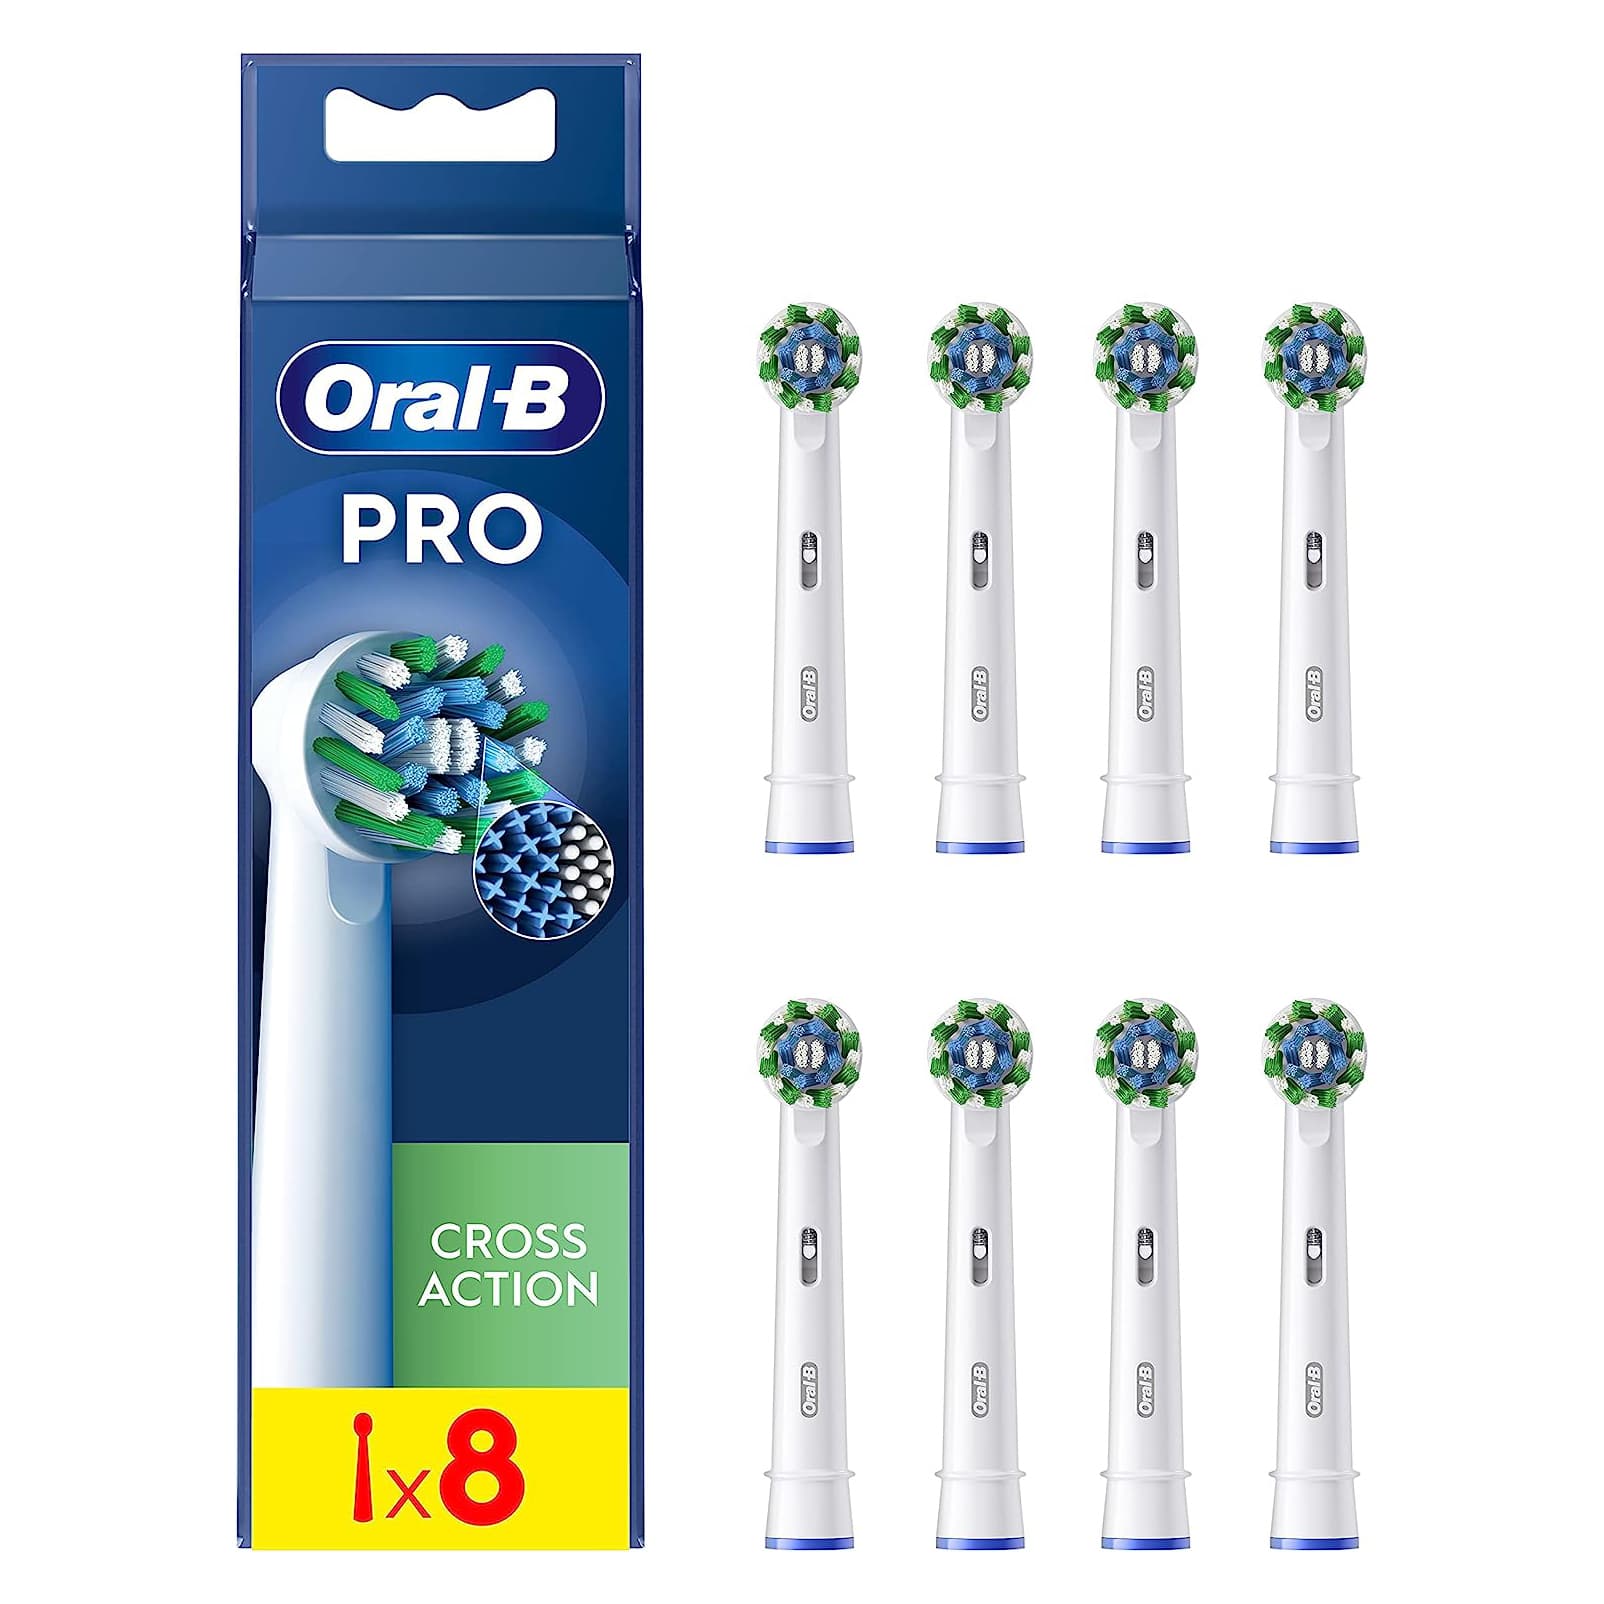 Oral-B CrossAction PRO Electric Toothbrush Heads with CleanMaximiser Technology – White 8 Pack Electric Toothbrush  |  Replacement Heads  |